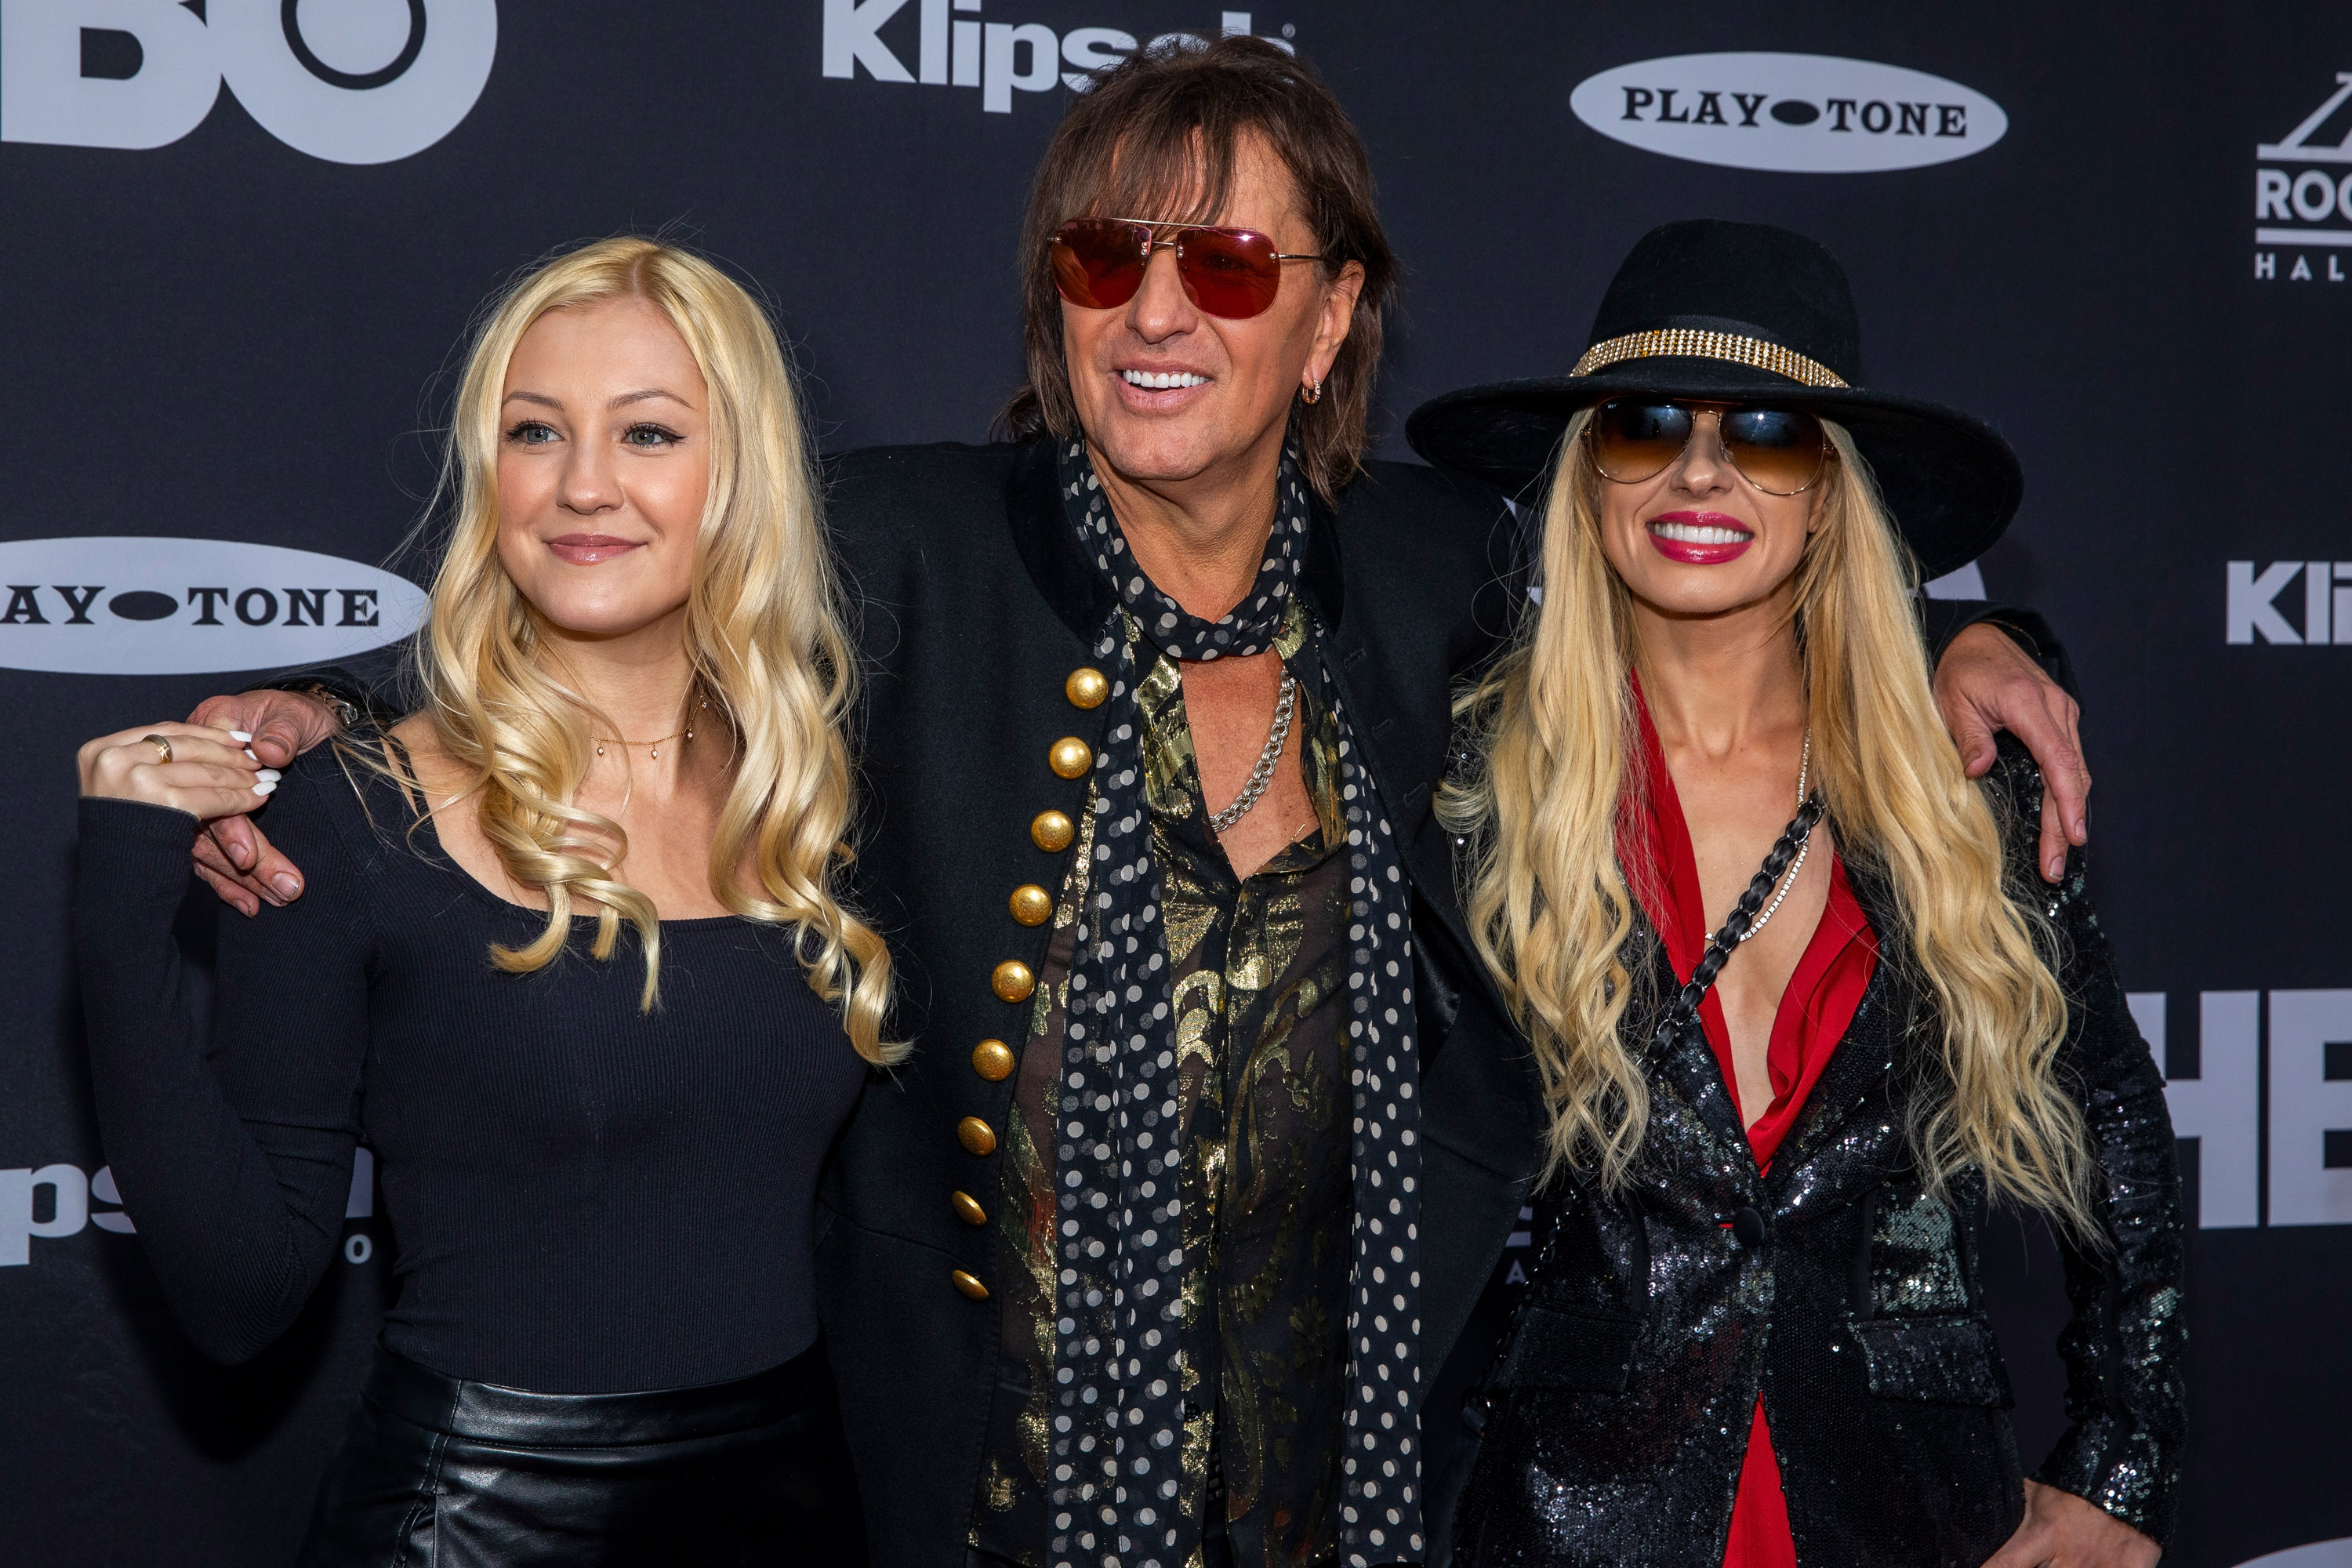 Ava Sambora, Richie Sambora, and Orianthi at the 33rd Annual Rock & Roll Hall of Fame Induction Ceremony in Cleveland, Ohio on April 14, 2018 | Source: Getty Images